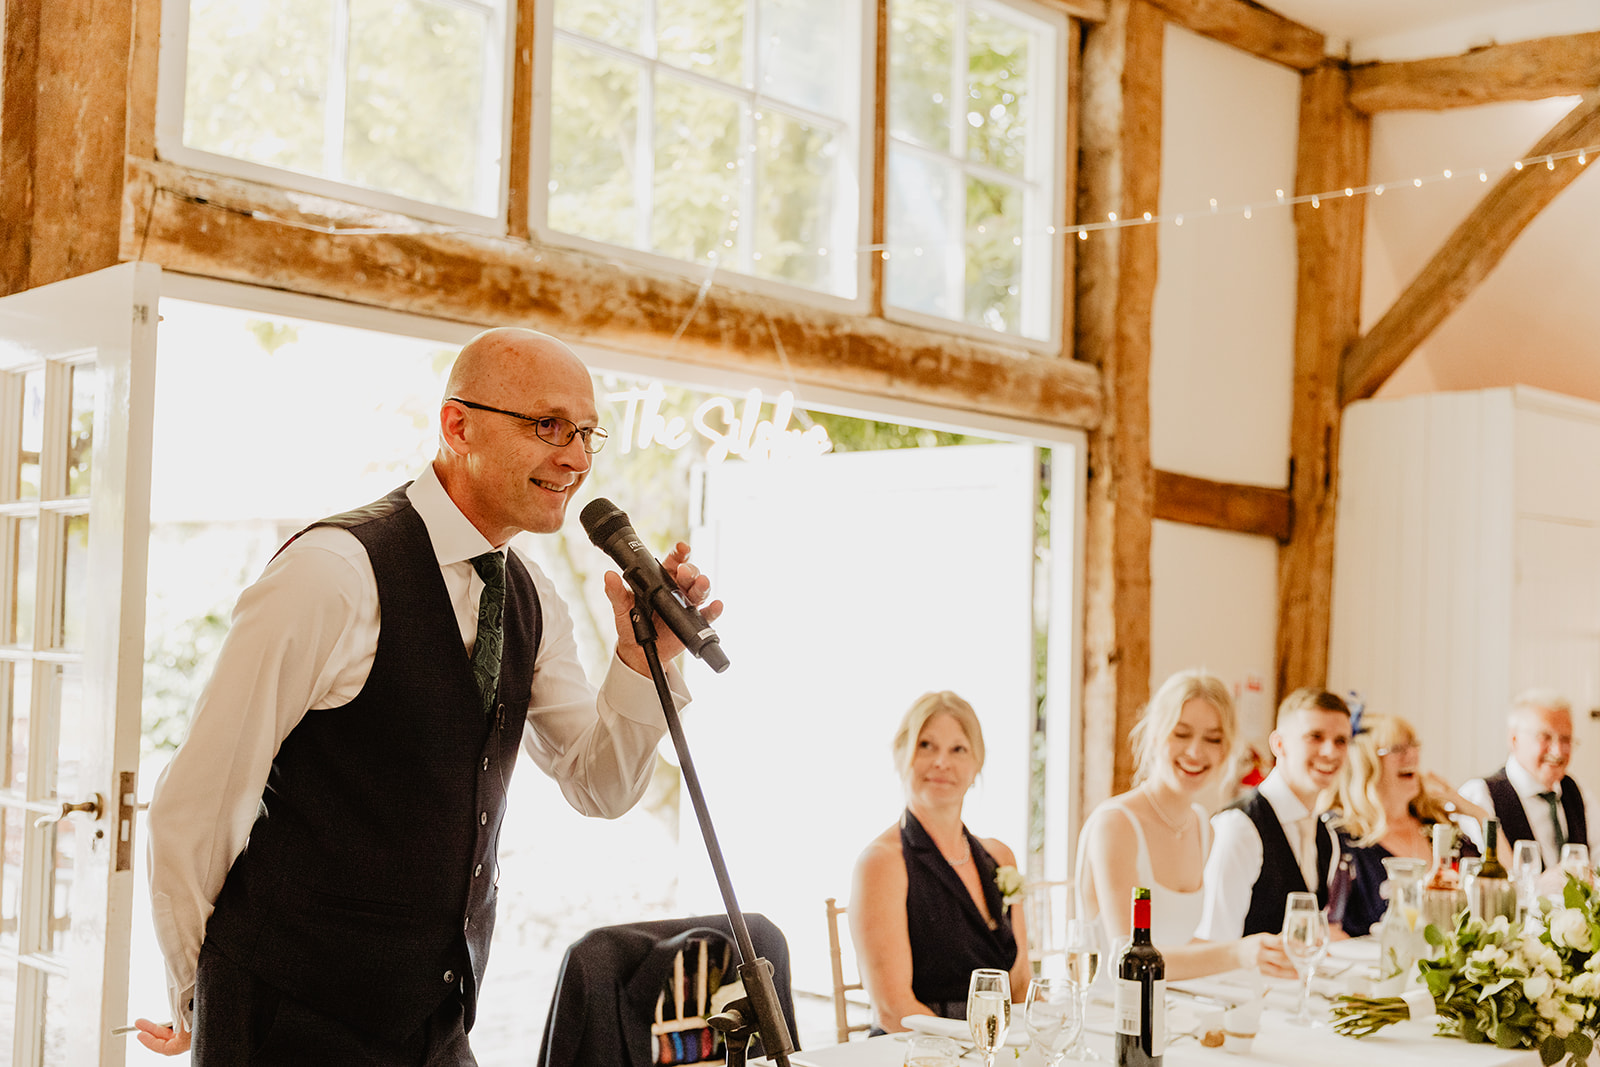 Wedding speeches at a Bury Manor Barn Wedding in Sussex. Photographer OliveJoy Photography.